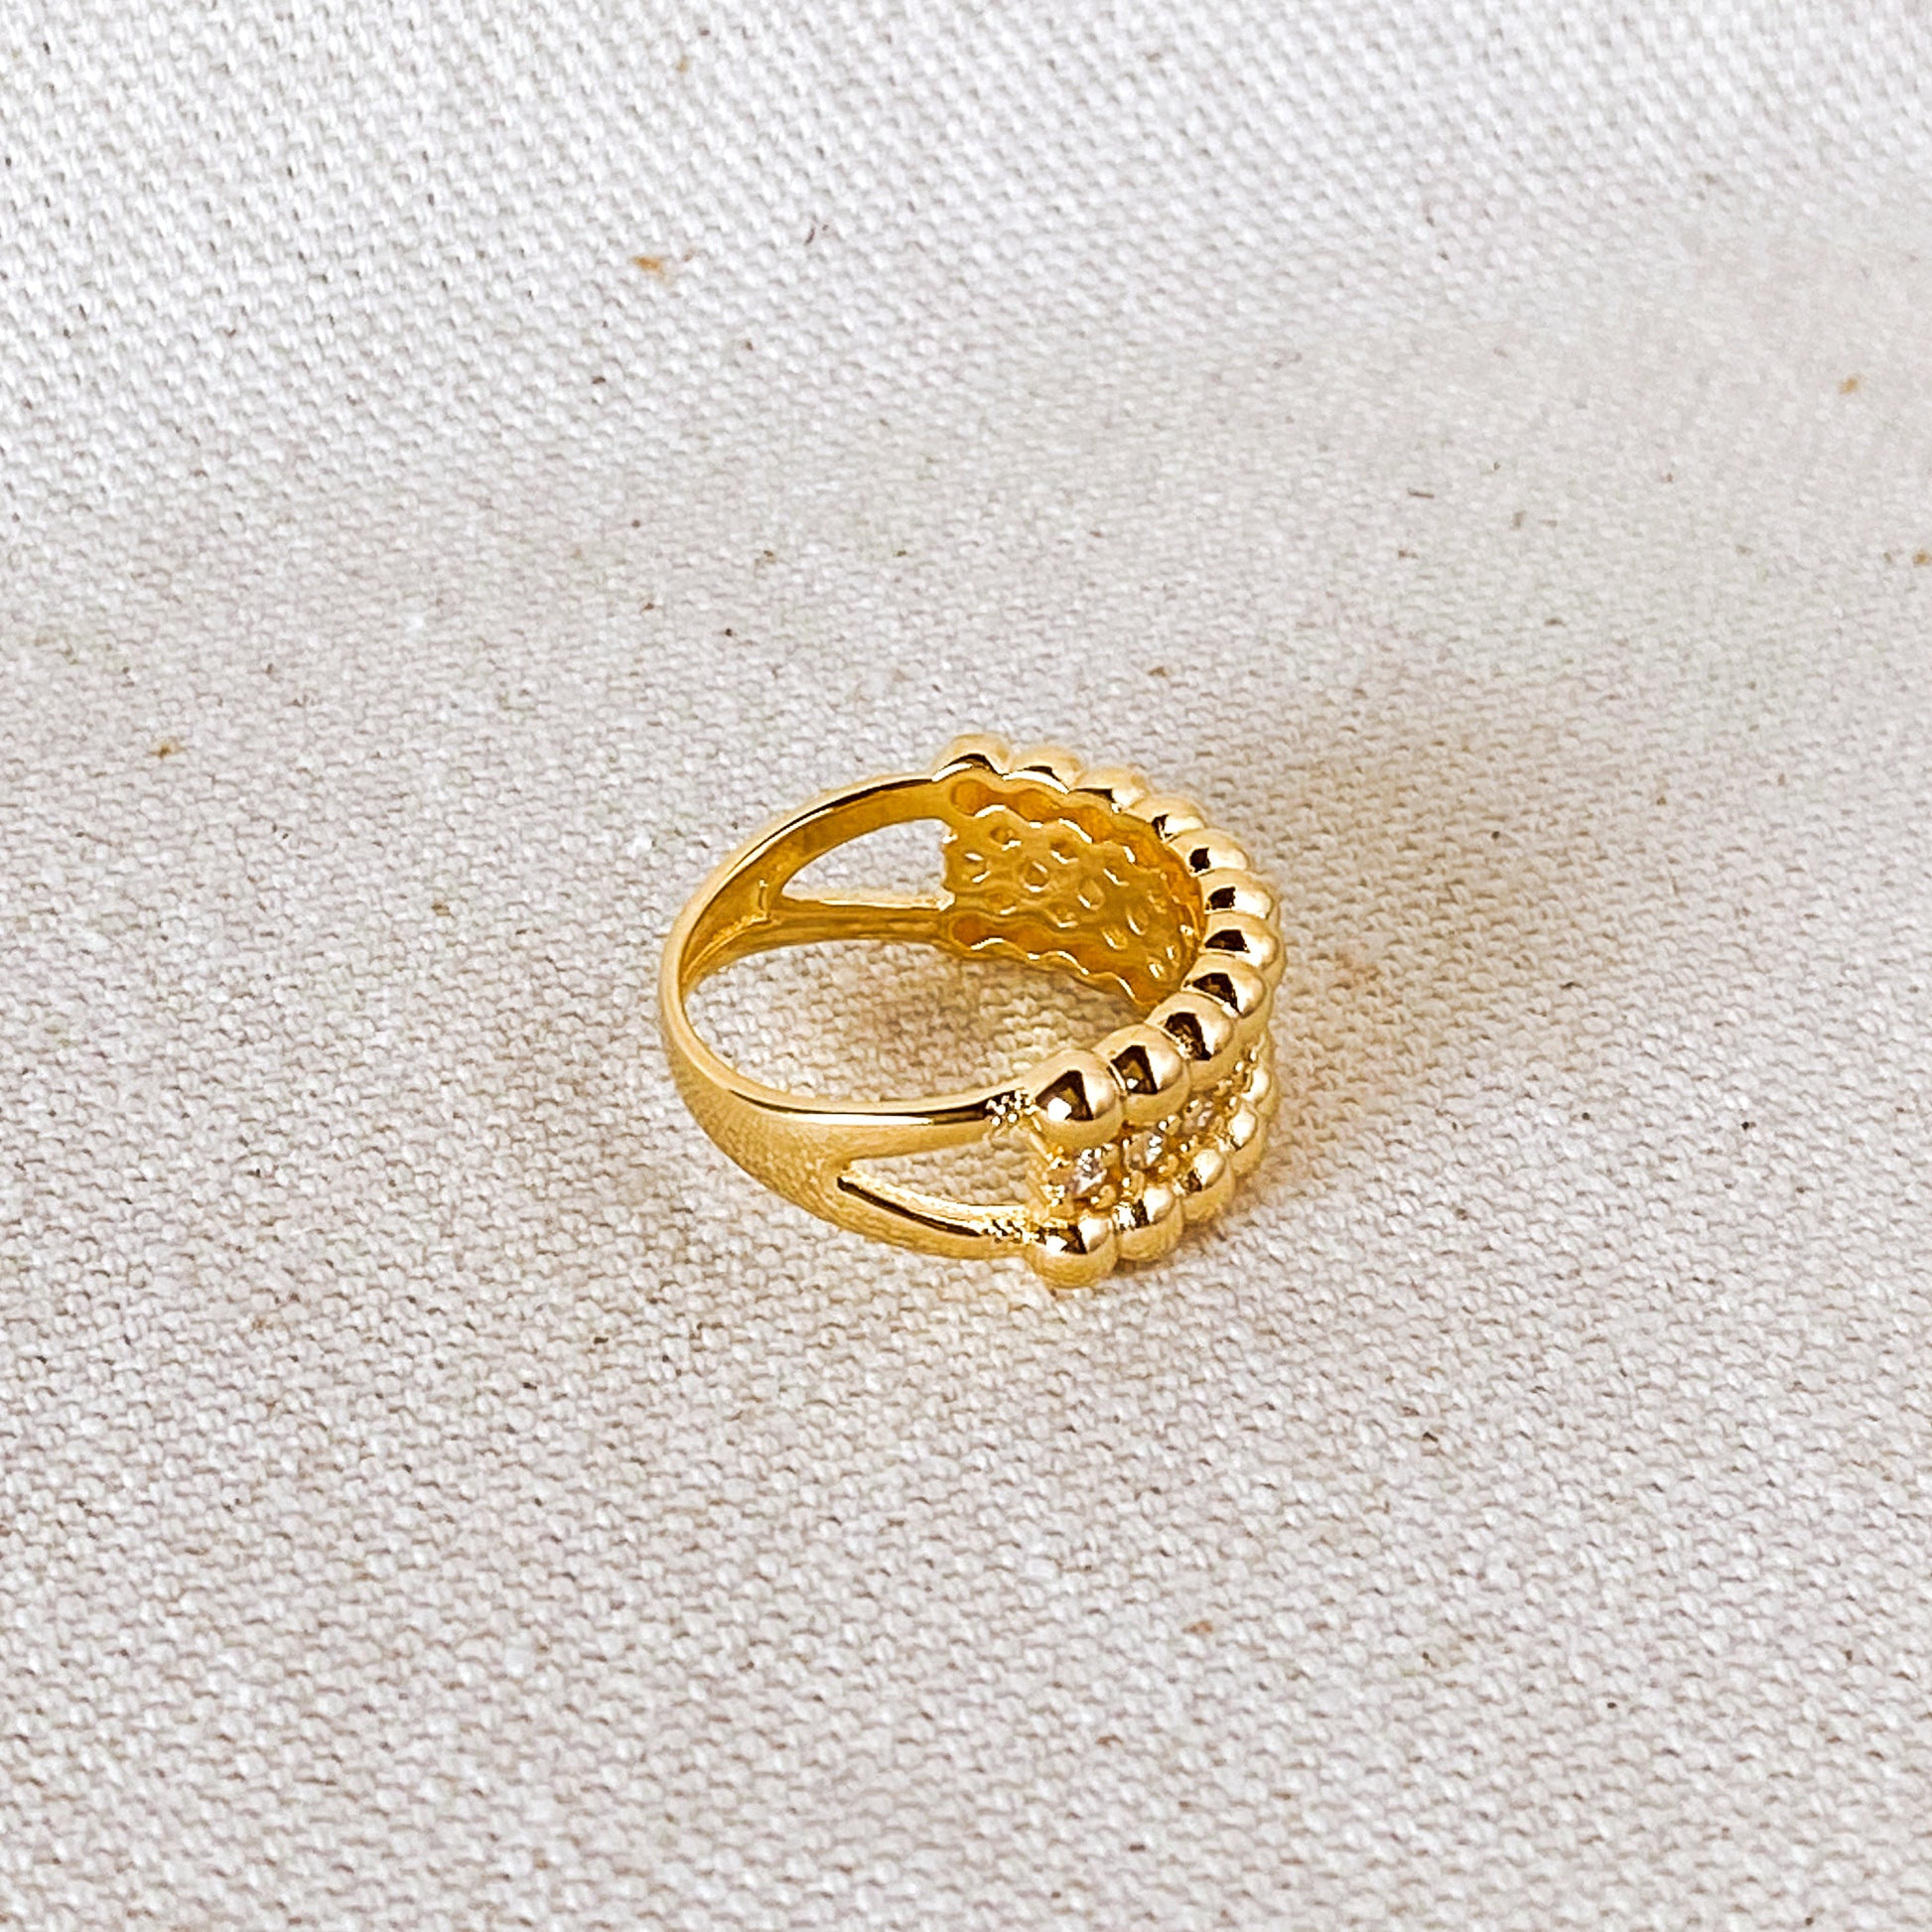 GoldFi 18k Gold Filled Beaded and Cubic Zirconia Ring